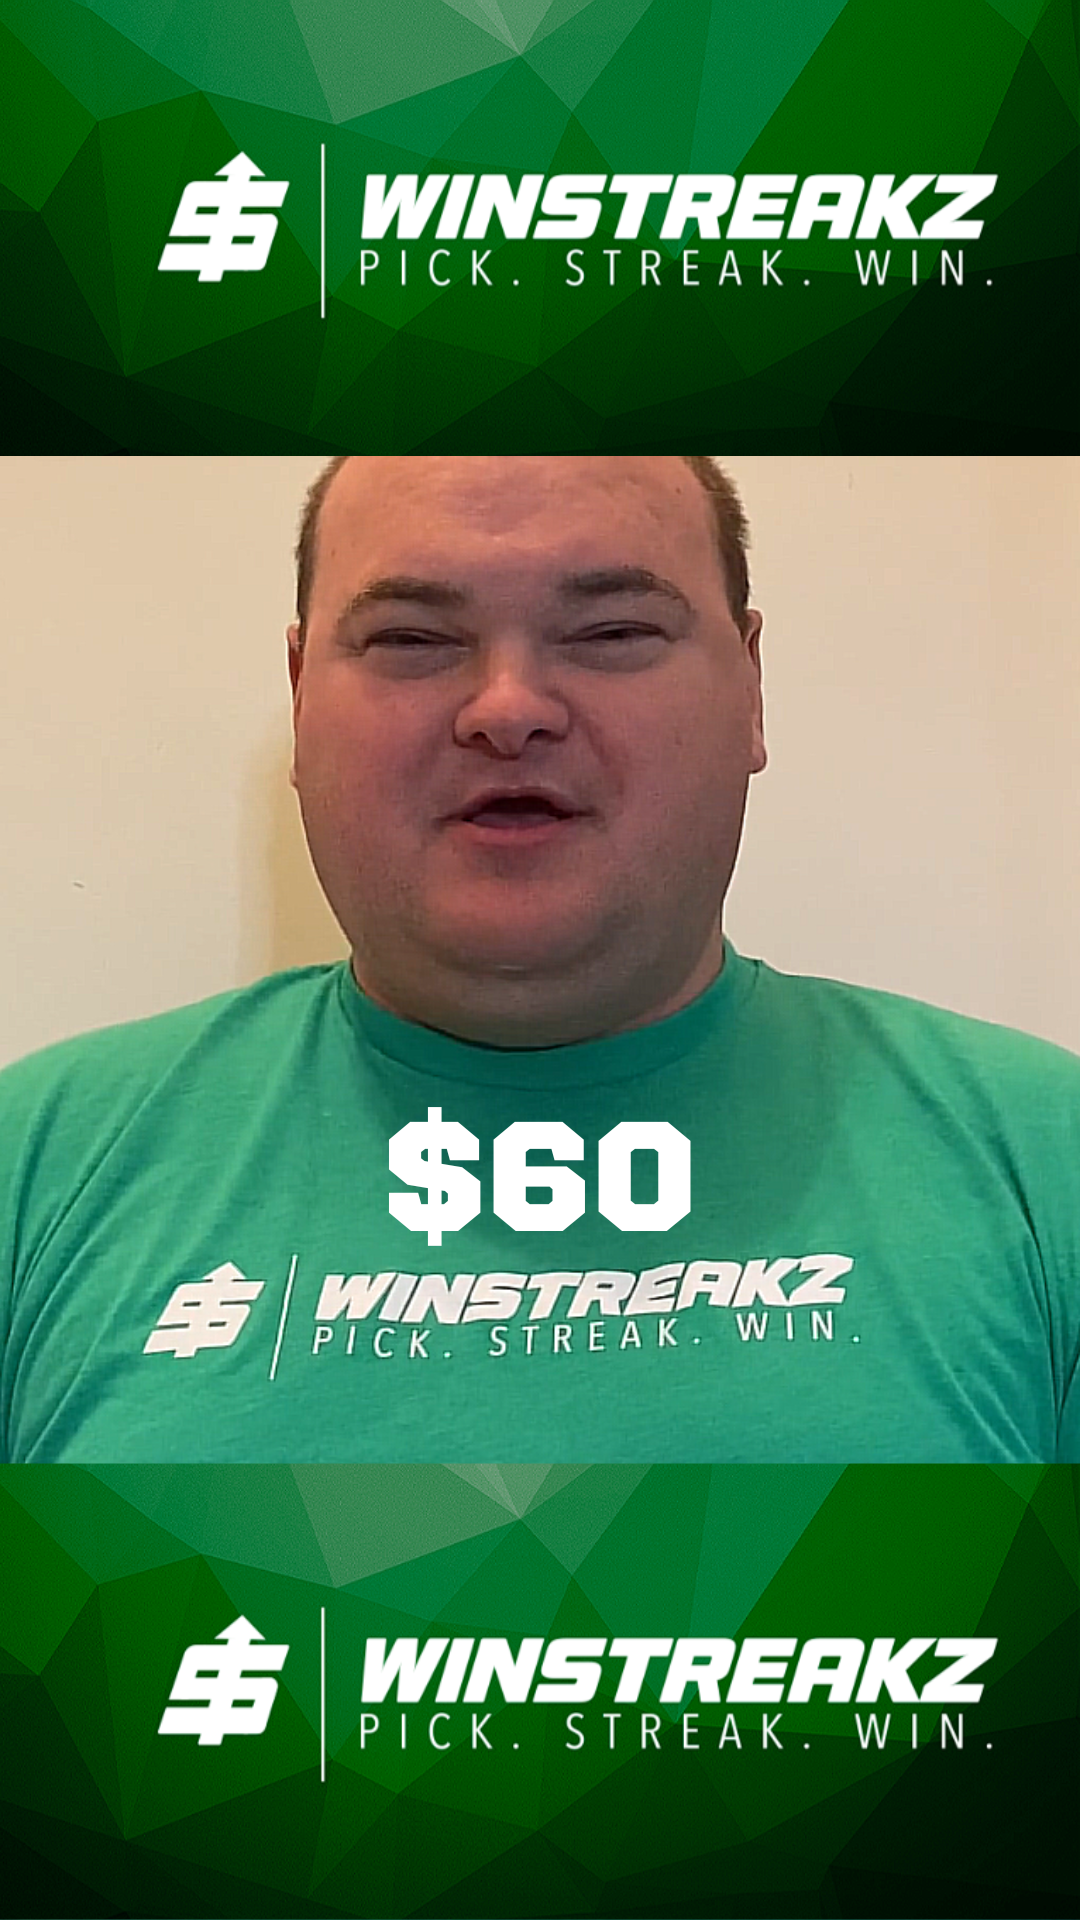 A man is wearing a green shirt that says WinStreakz on it.